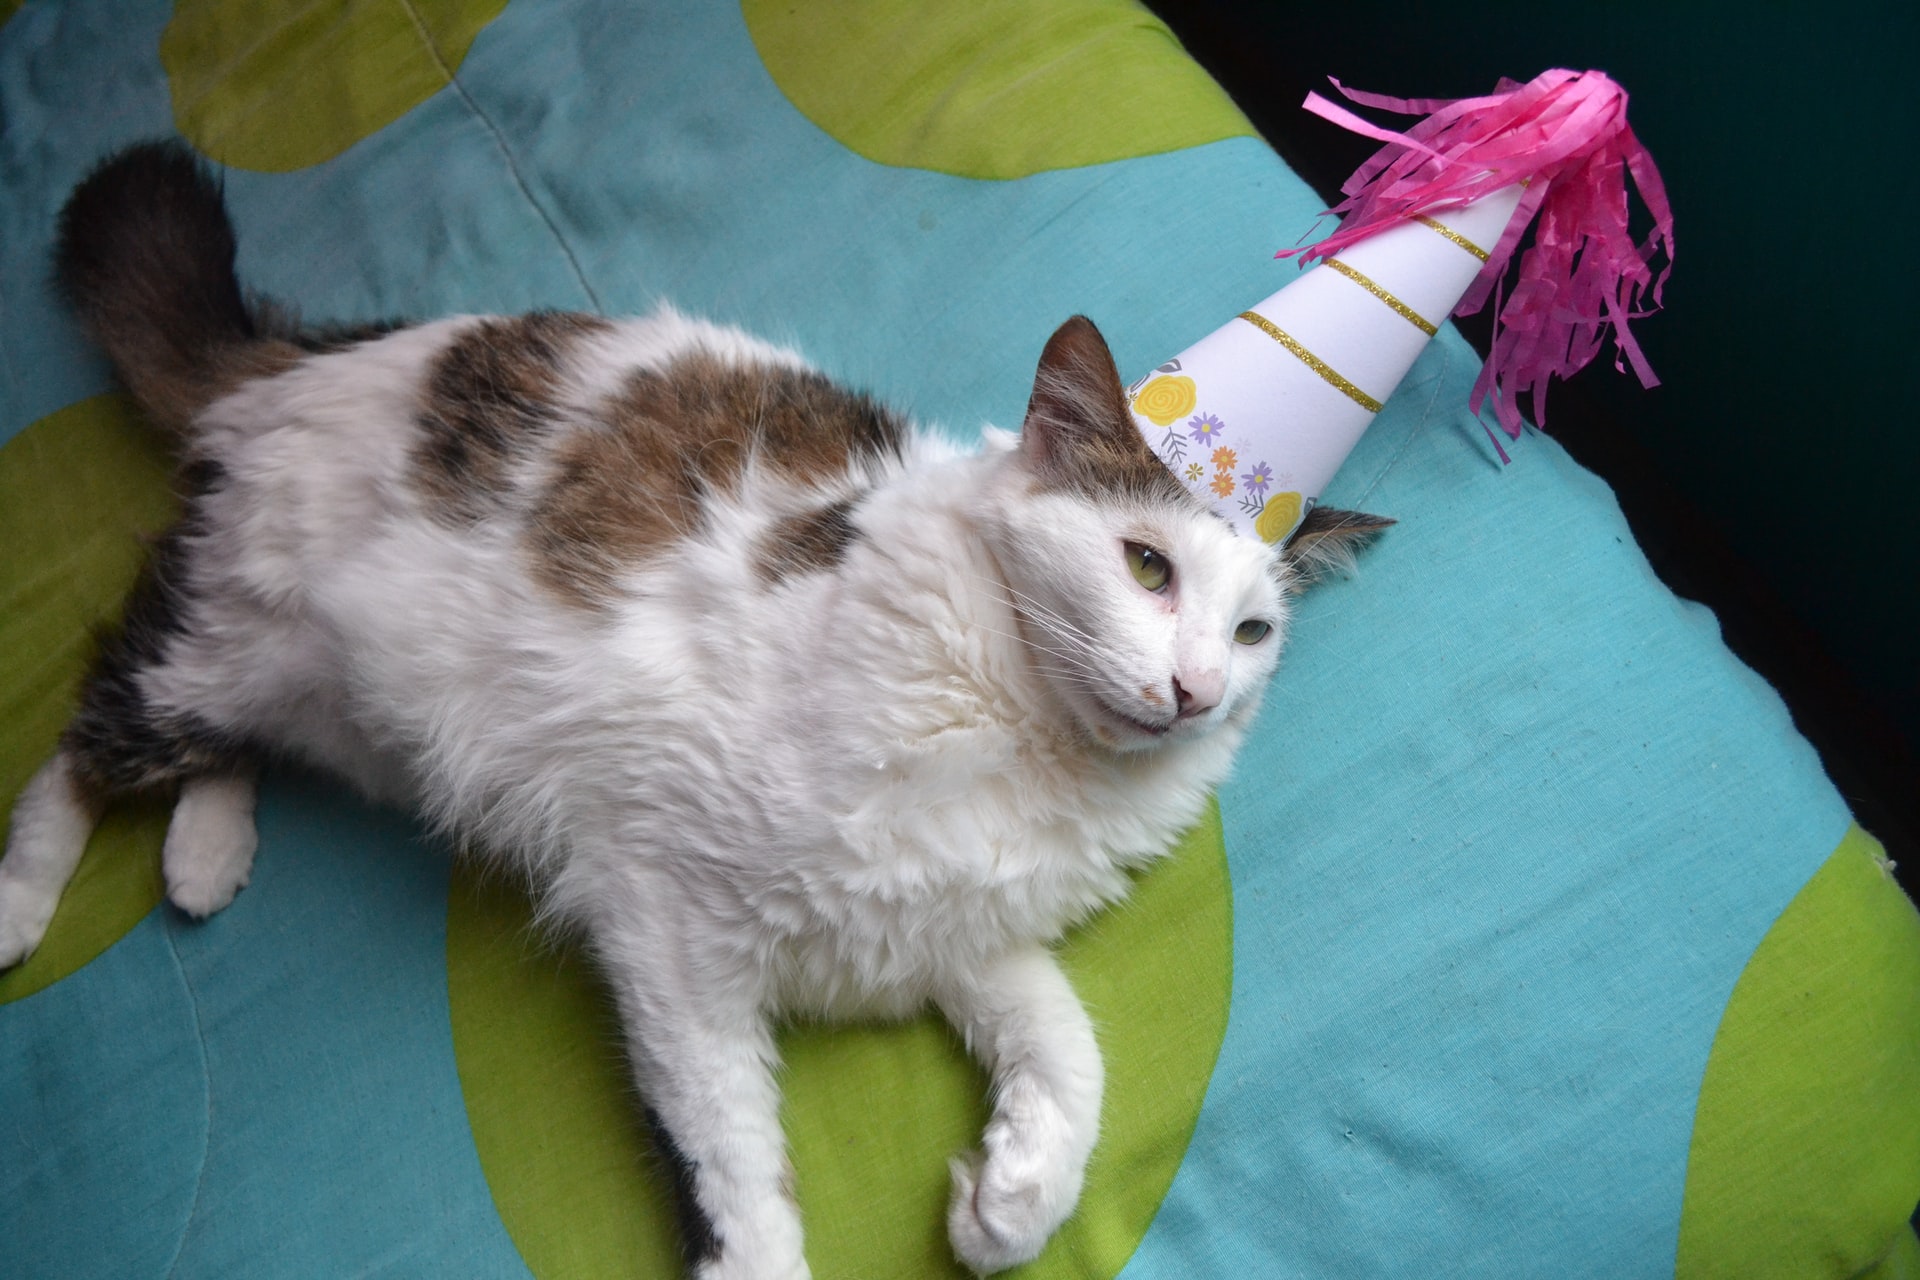 A white patched cat lying on a blanket with a party hat on his head.